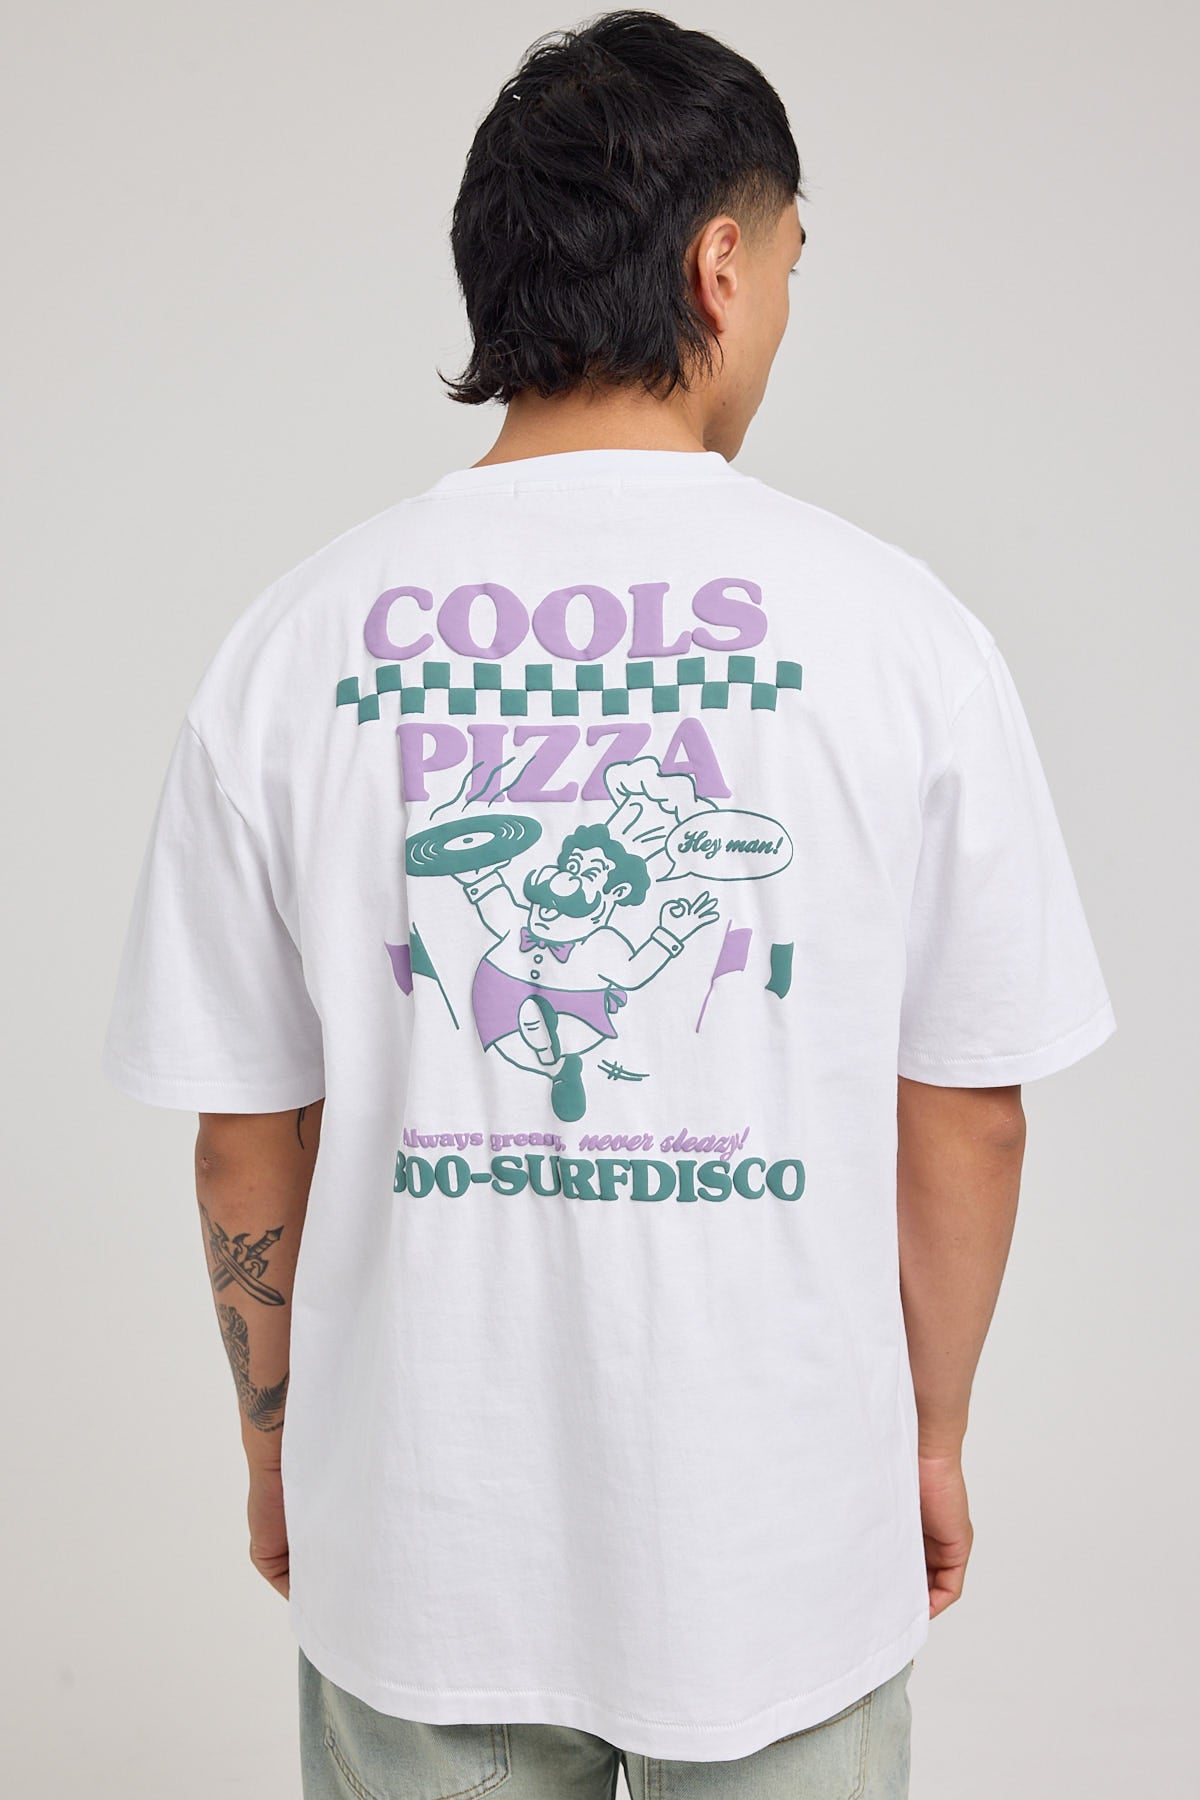 Barney Cools Pizza White Tee White